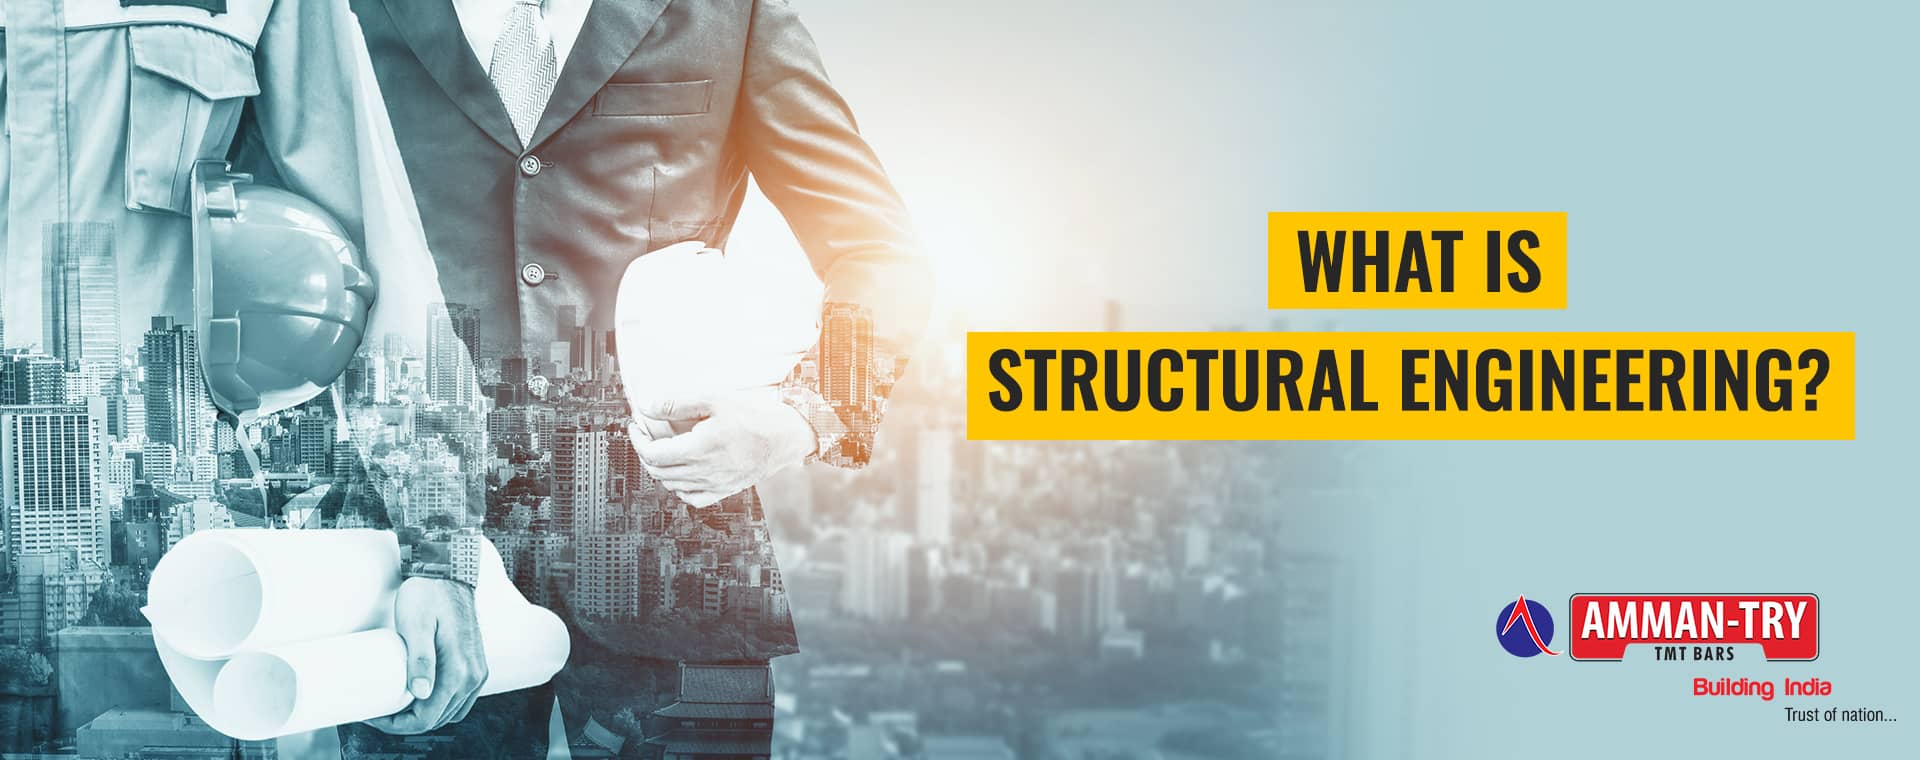 STRUCTURAL ENGINEERING & ROLE OF STRUCTURAL ENGINEER